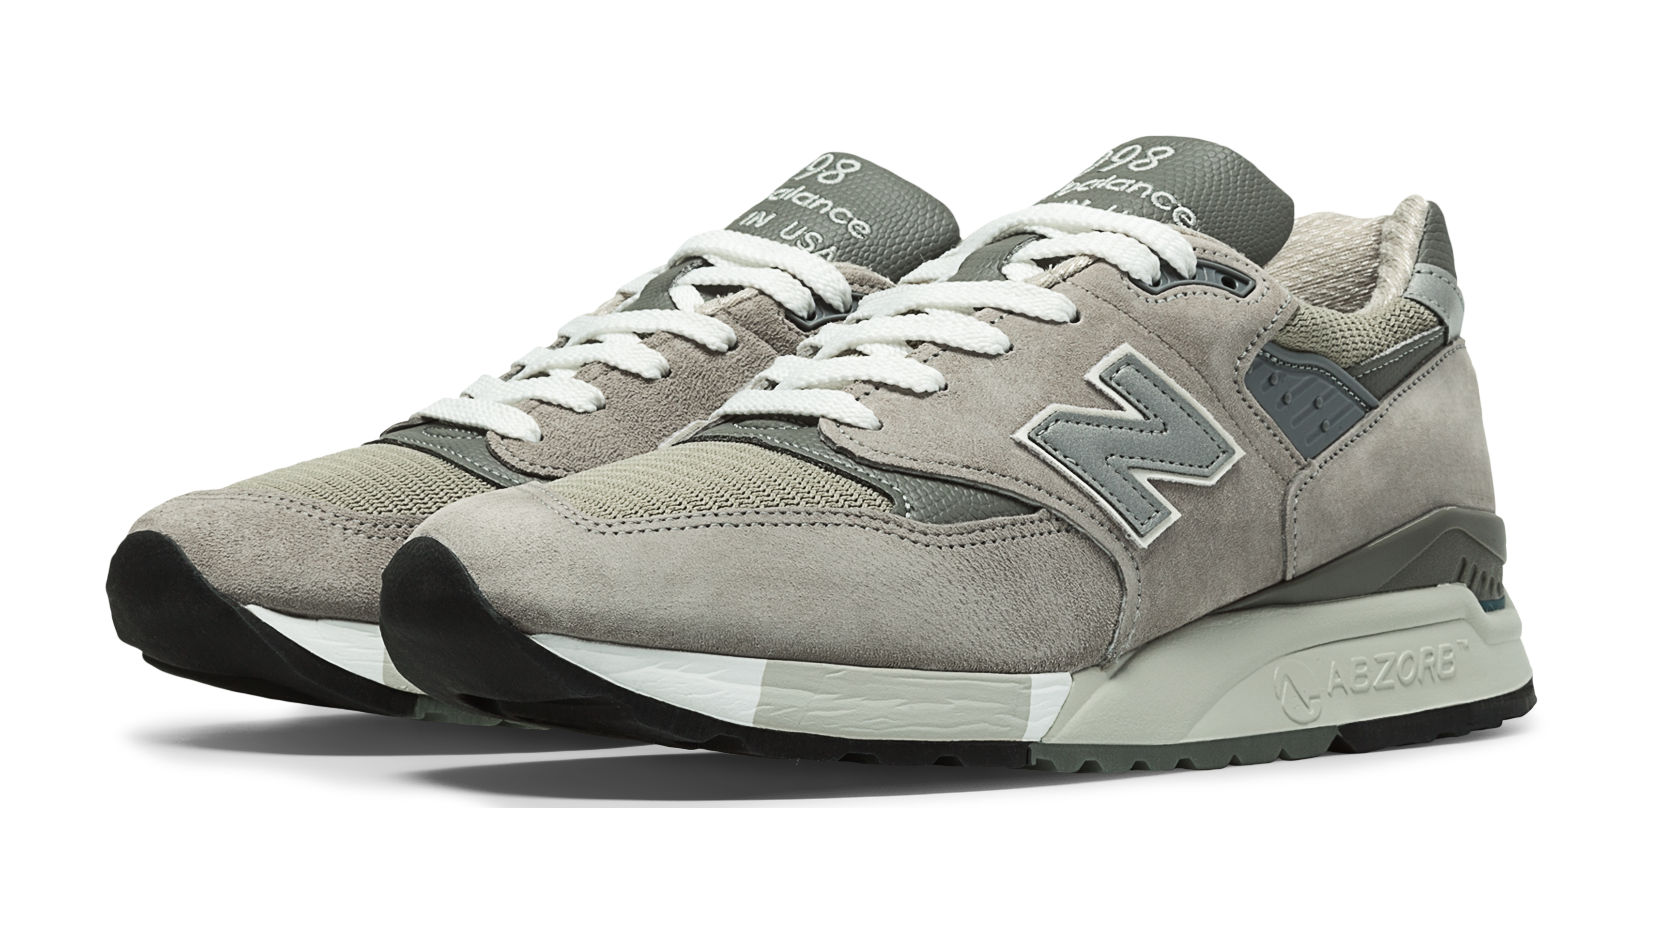 New Balance 998 Made in the USA Bringback, Light Grey with Grey